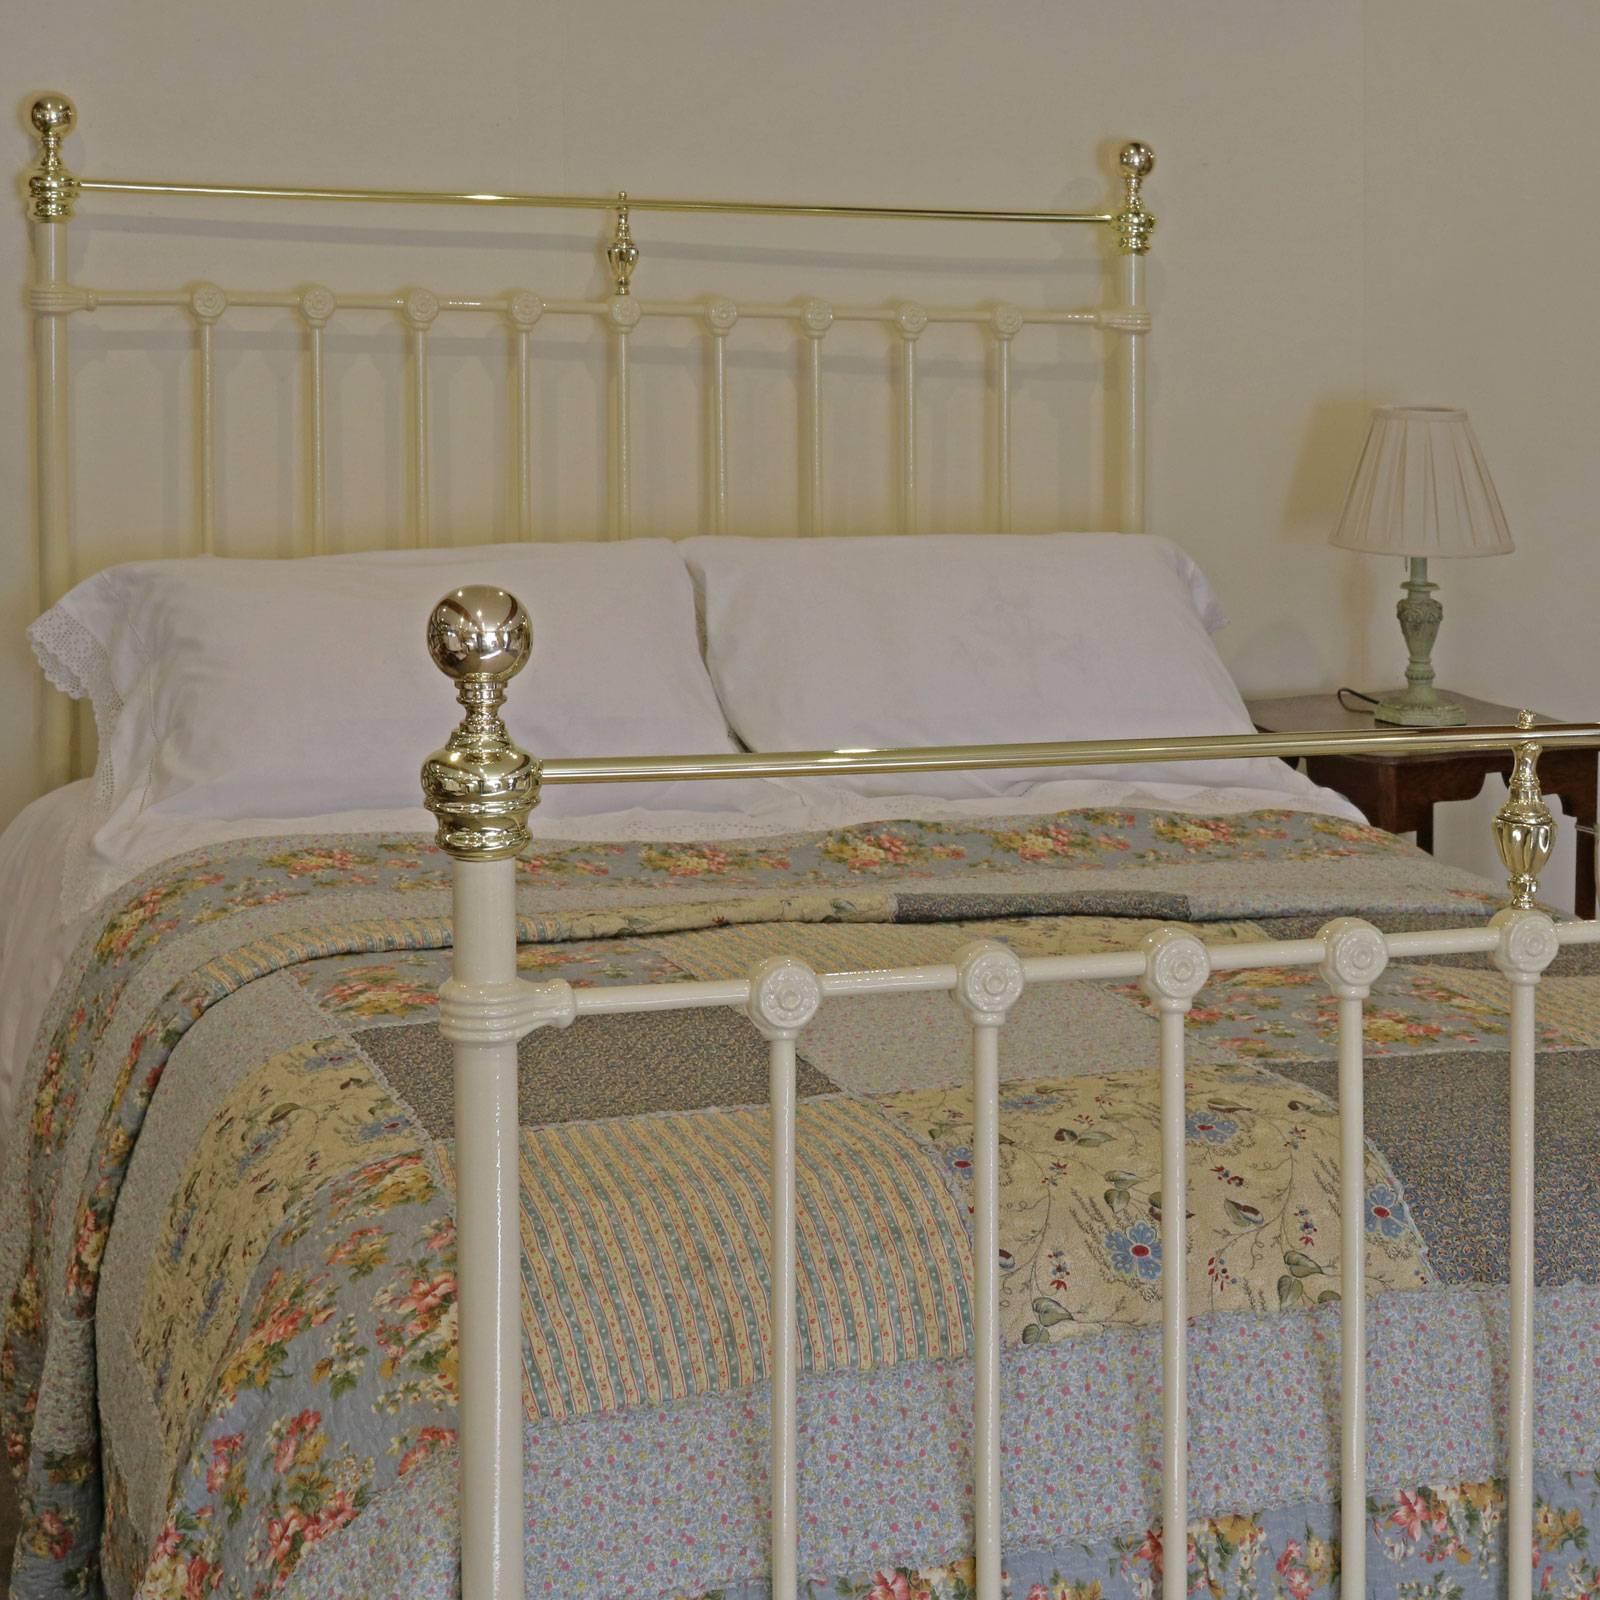 A Victorian cast iron and brass bedstead in cream with straight top brass rails in the 5ft width, circa 1895.

This bed accepts a British king-size or American queen-size base and mattress set.
The price is for the bedstead alone. The base,